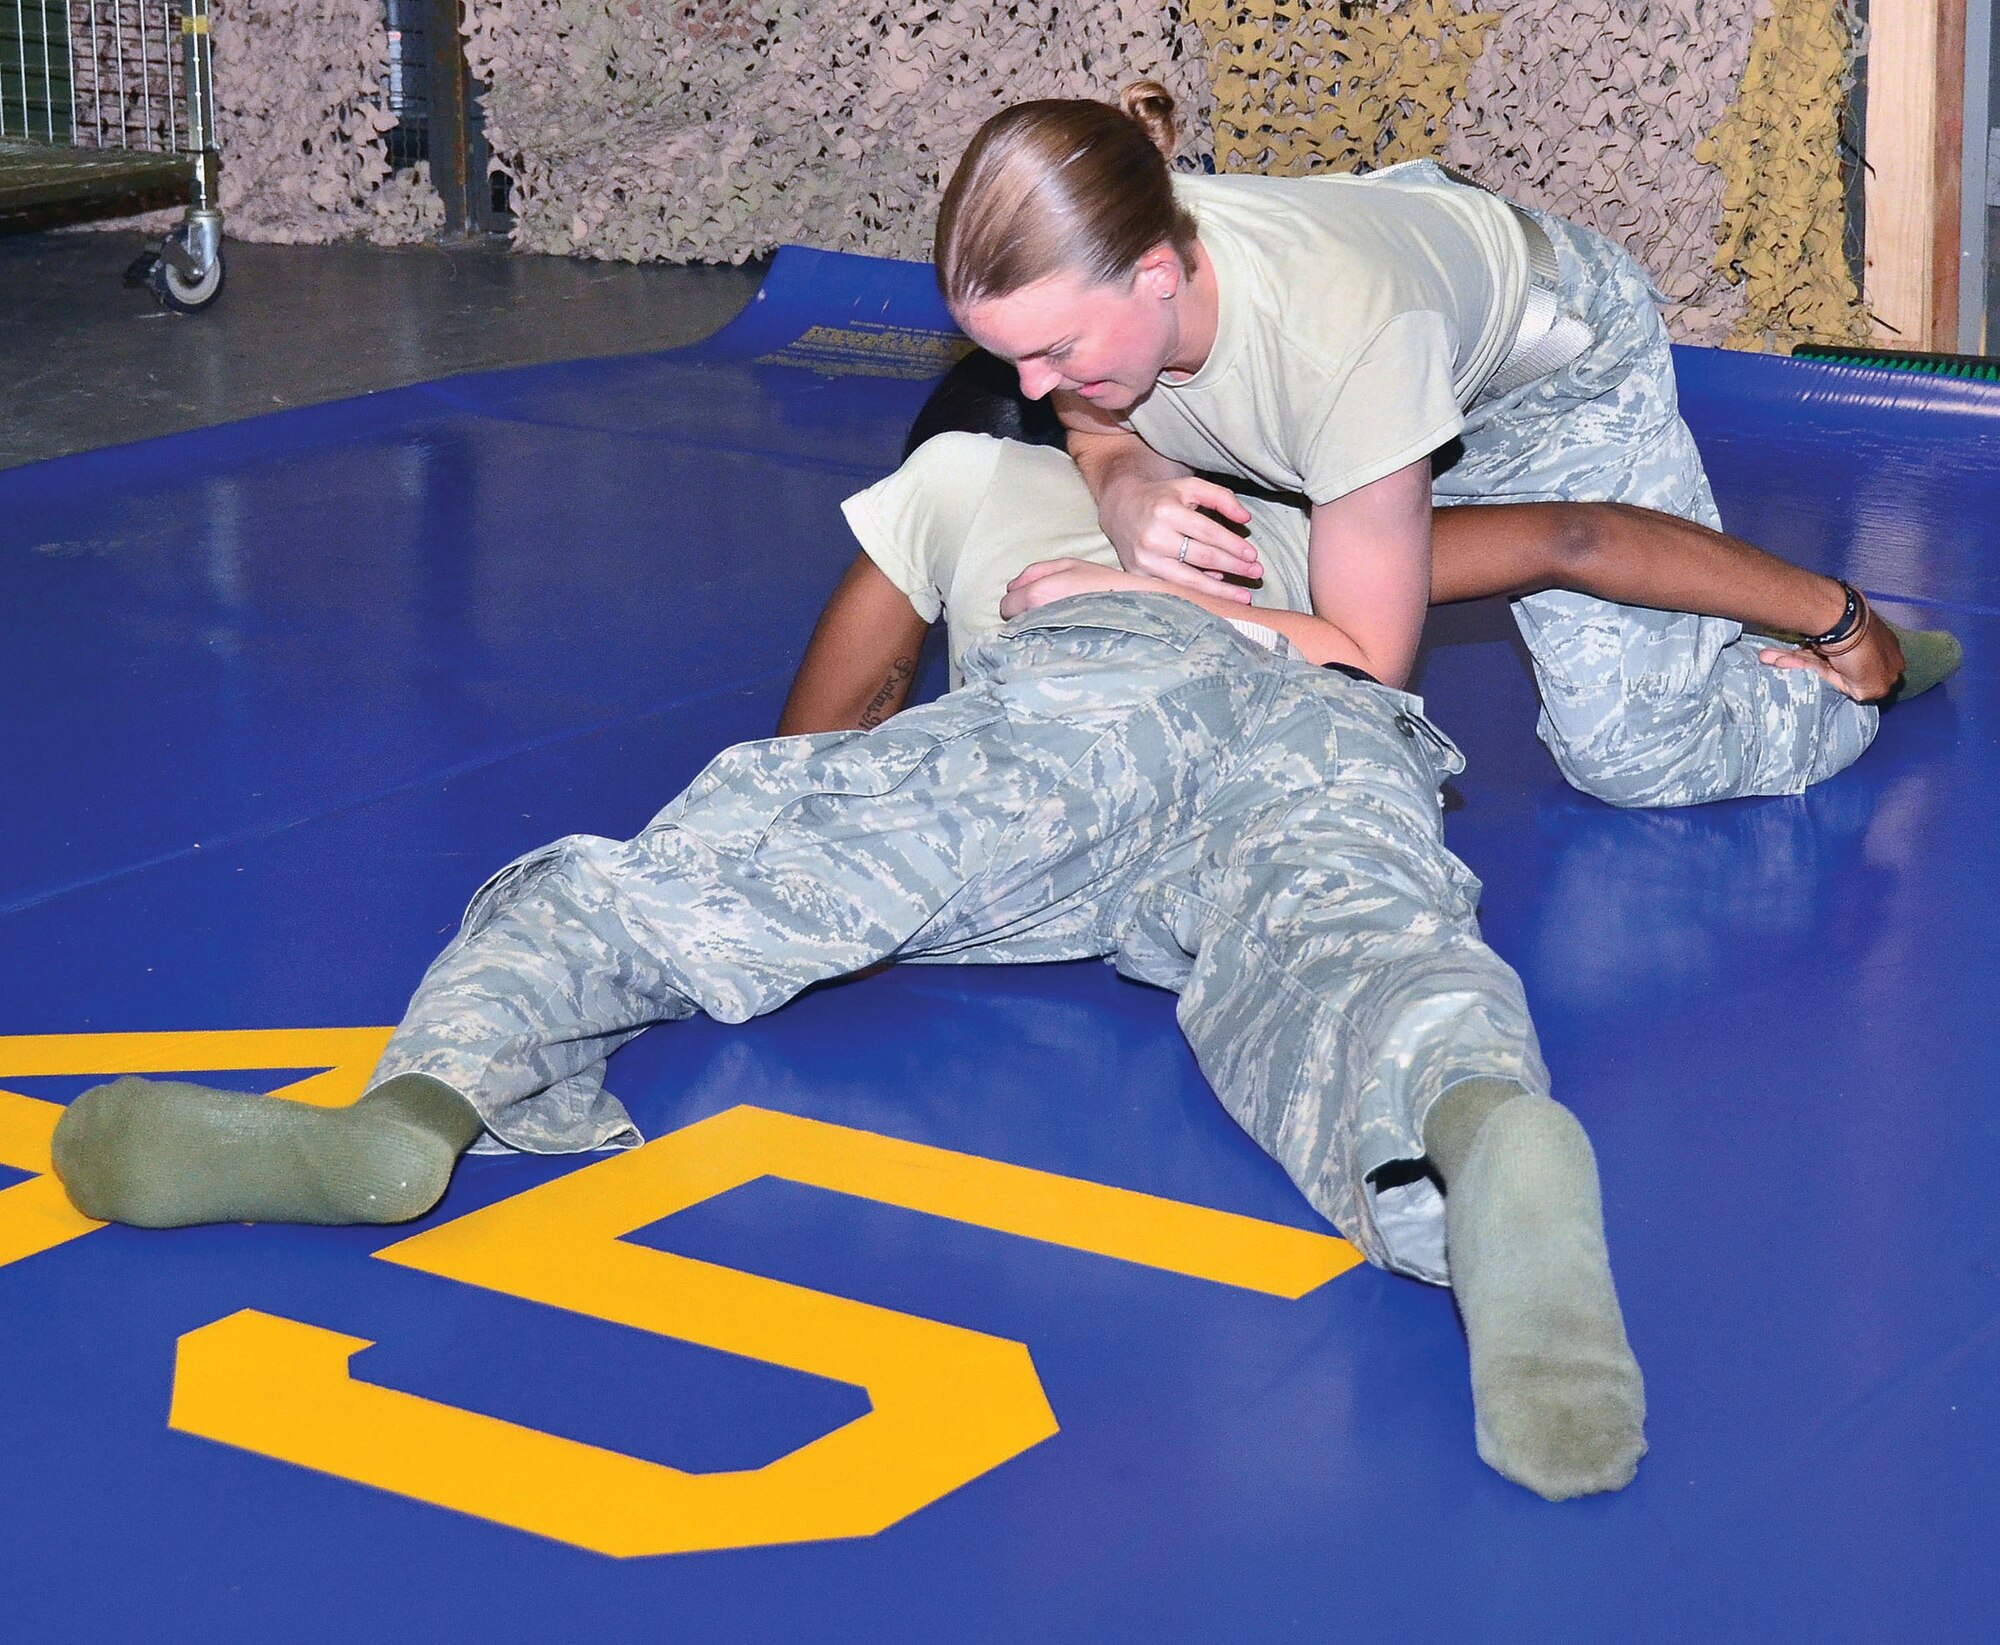 WRIGHT-PATTERSON AIR FORCE BASE, Ohio – Staff Sgts. Dawn Gettys and Cazavia Henley, 445th Security Forces Squadron, practice Combative Security Forces Self-Defense during the July 13 unit training assembly. All security forces members are required to participate in the training. New SFS members or those directly out of technical school have a 20-hour initial training followed by 10 hours of annual training to remain qualified. This training is specifically for SFS and is different from Army and Air Force combative training. (U.S. Air Force photo/Staff Sgt. Amanda Duncan)